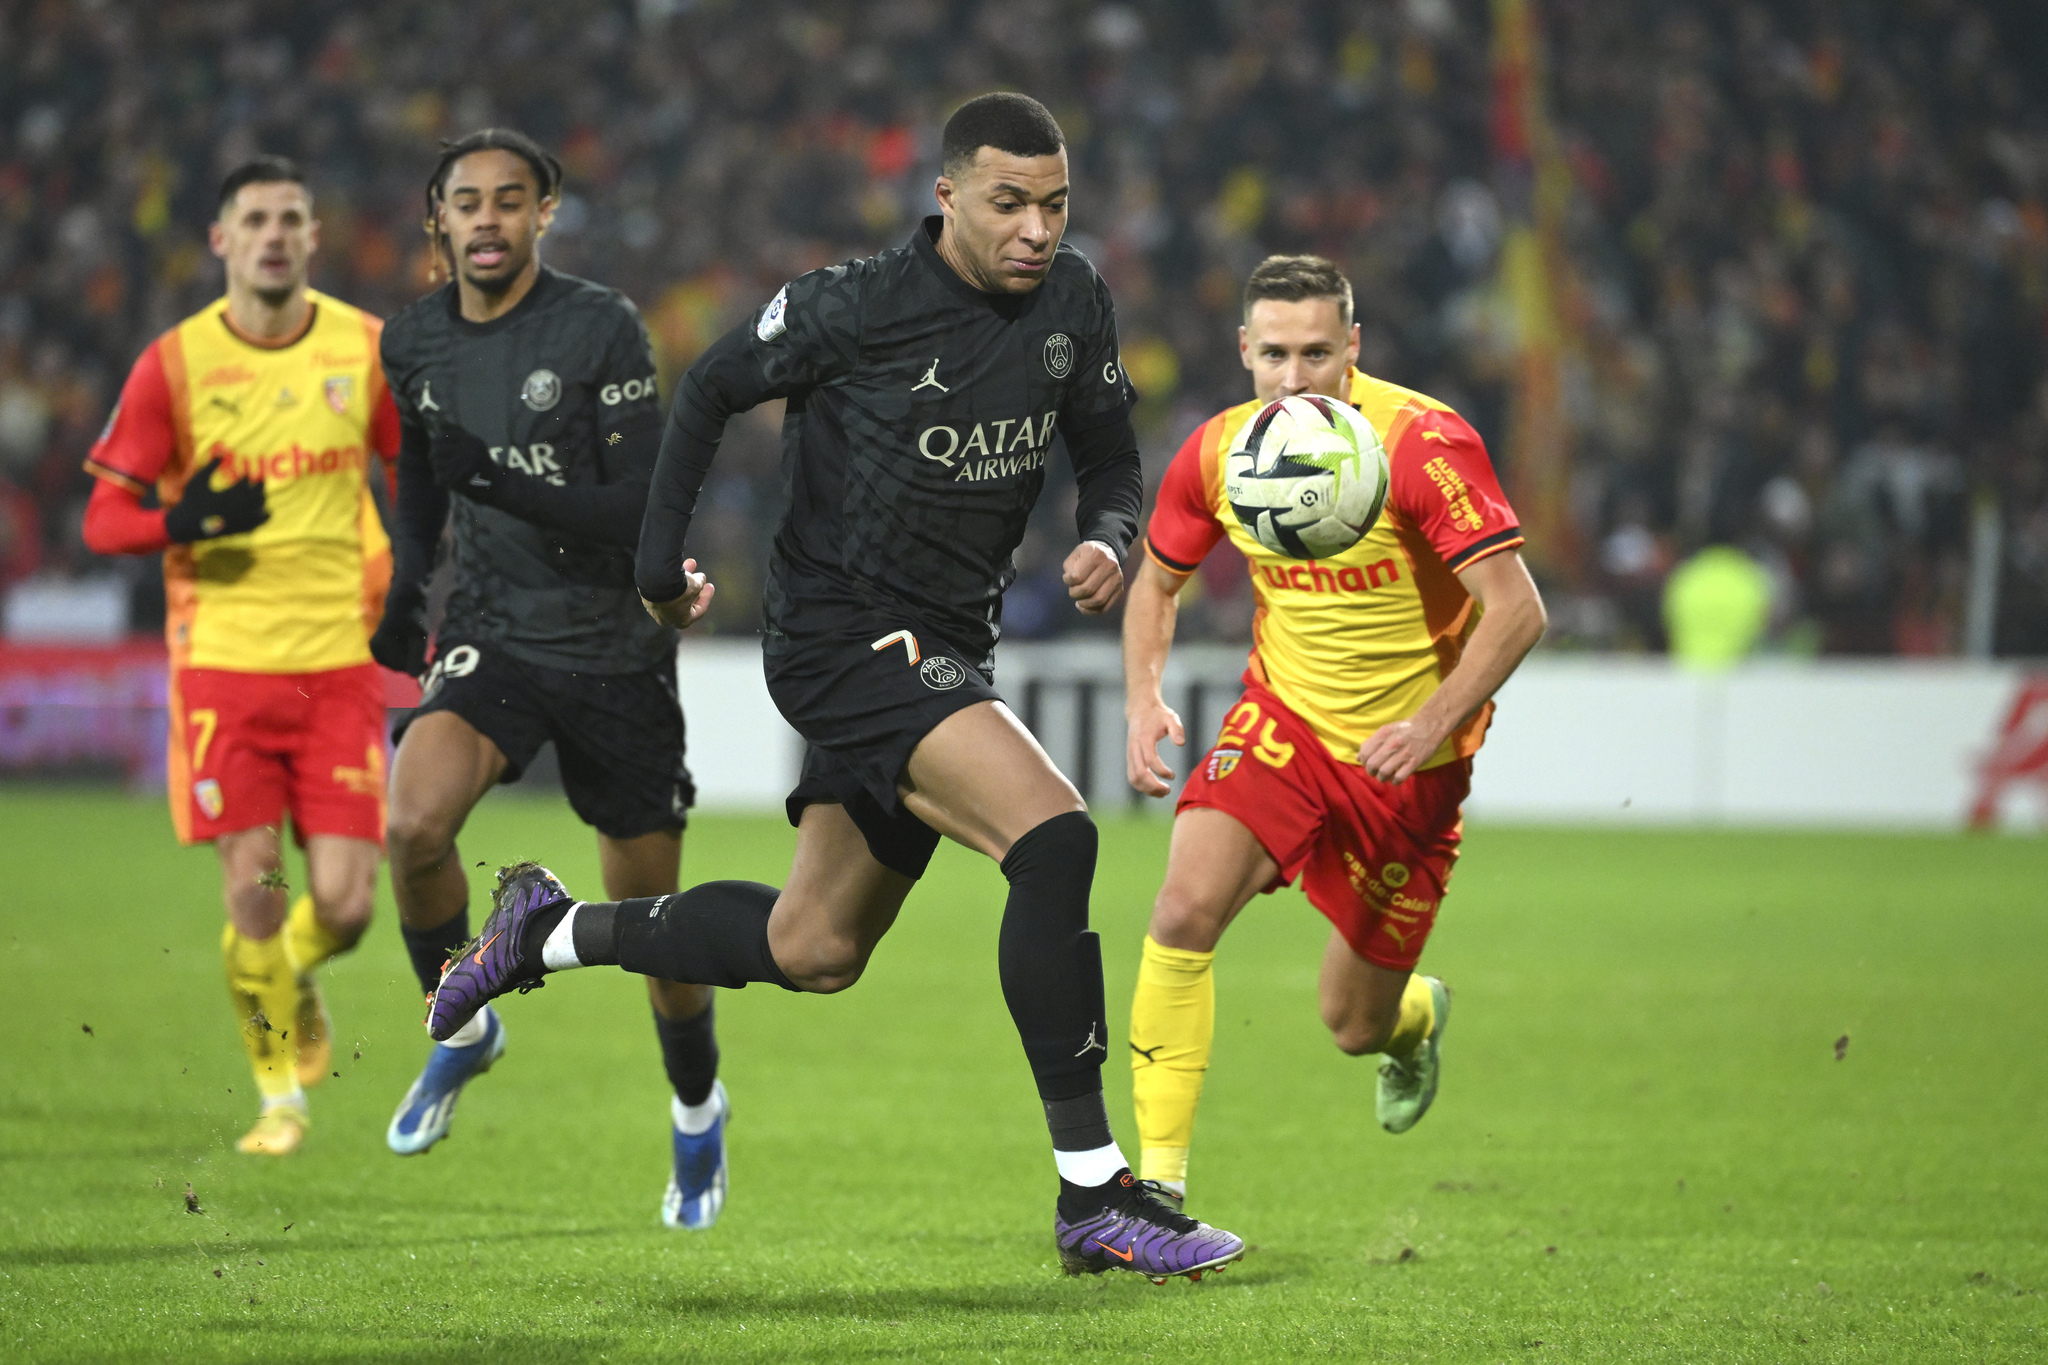 PSGs Kylian Mbappe controls the ball against Lens